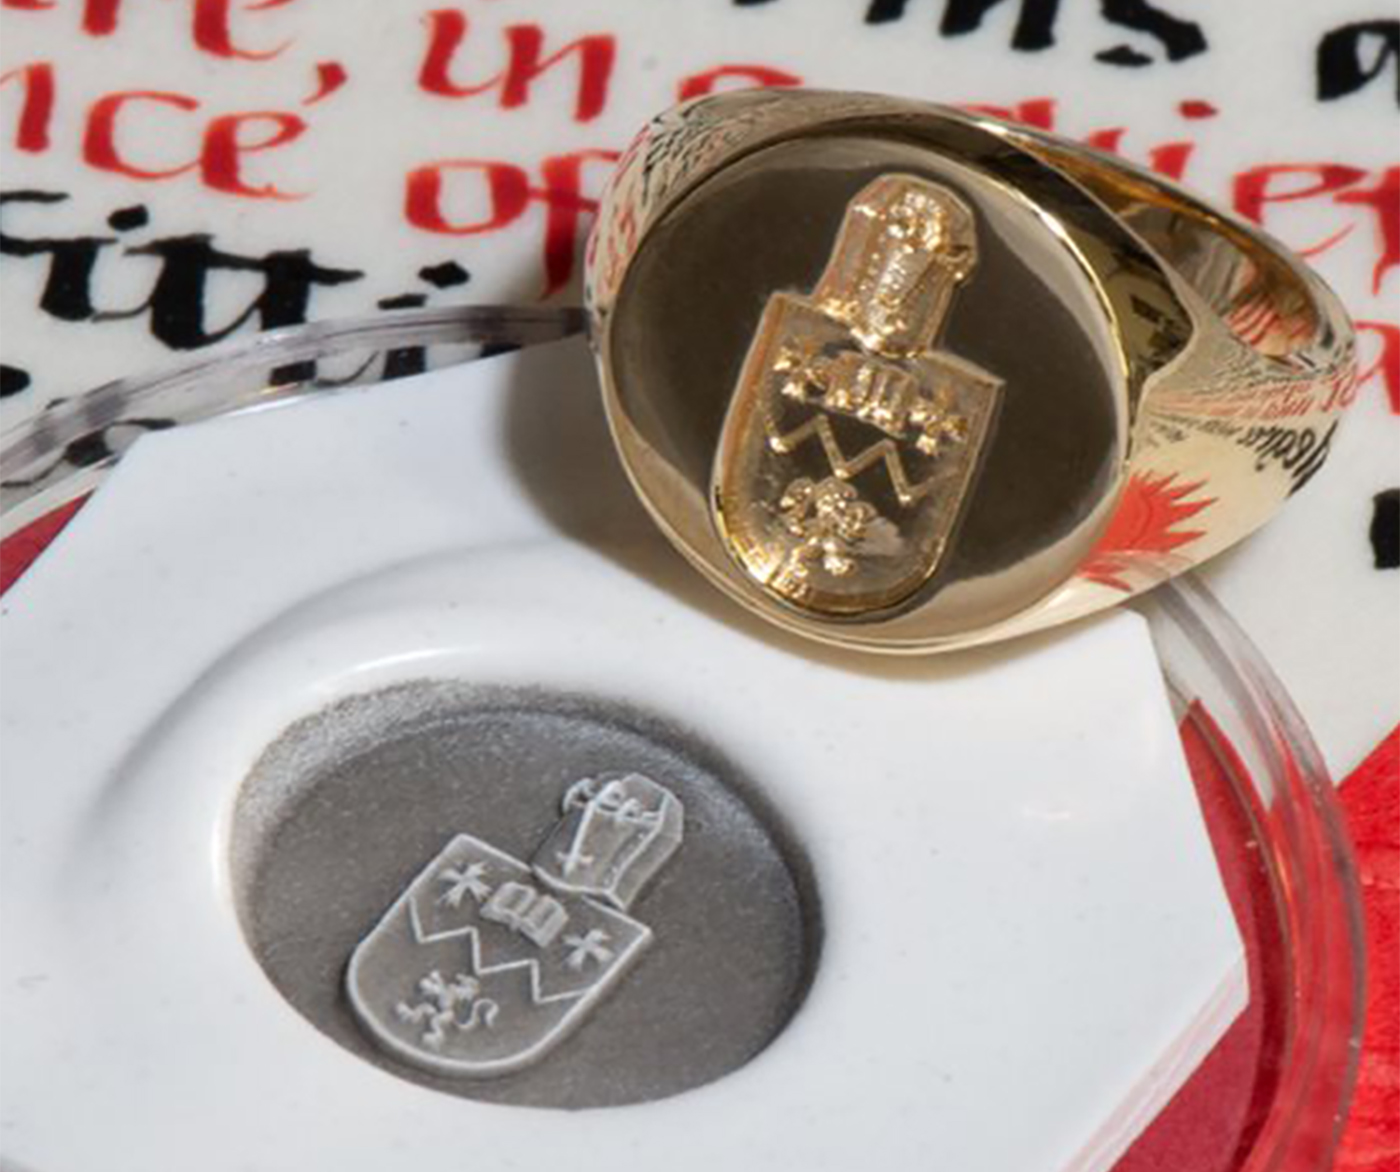 Gold signet ring with coat of arms engraving with seal on medieval calligraphy script background